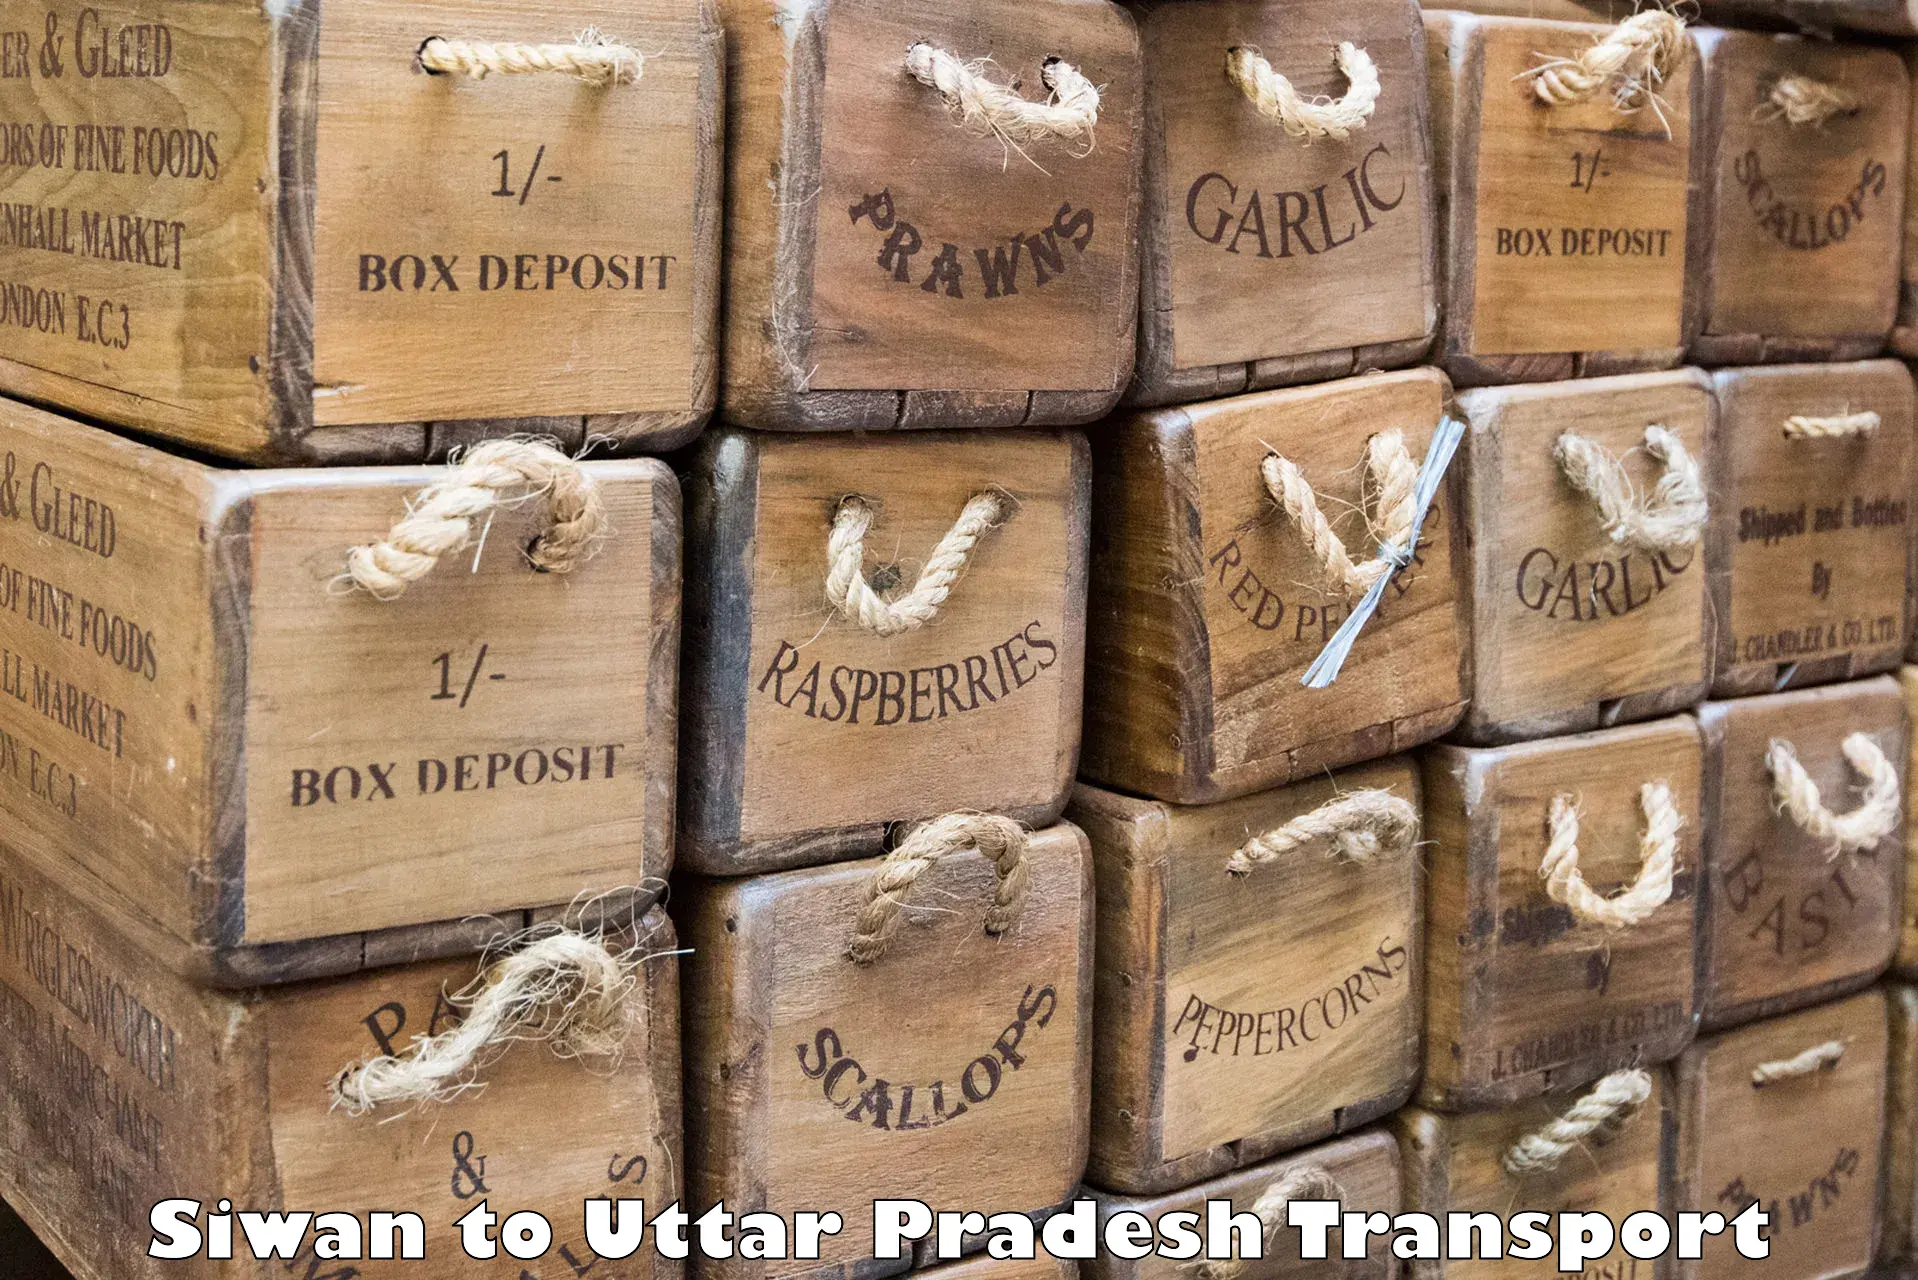 Express transport services in Siwan to Bahraich